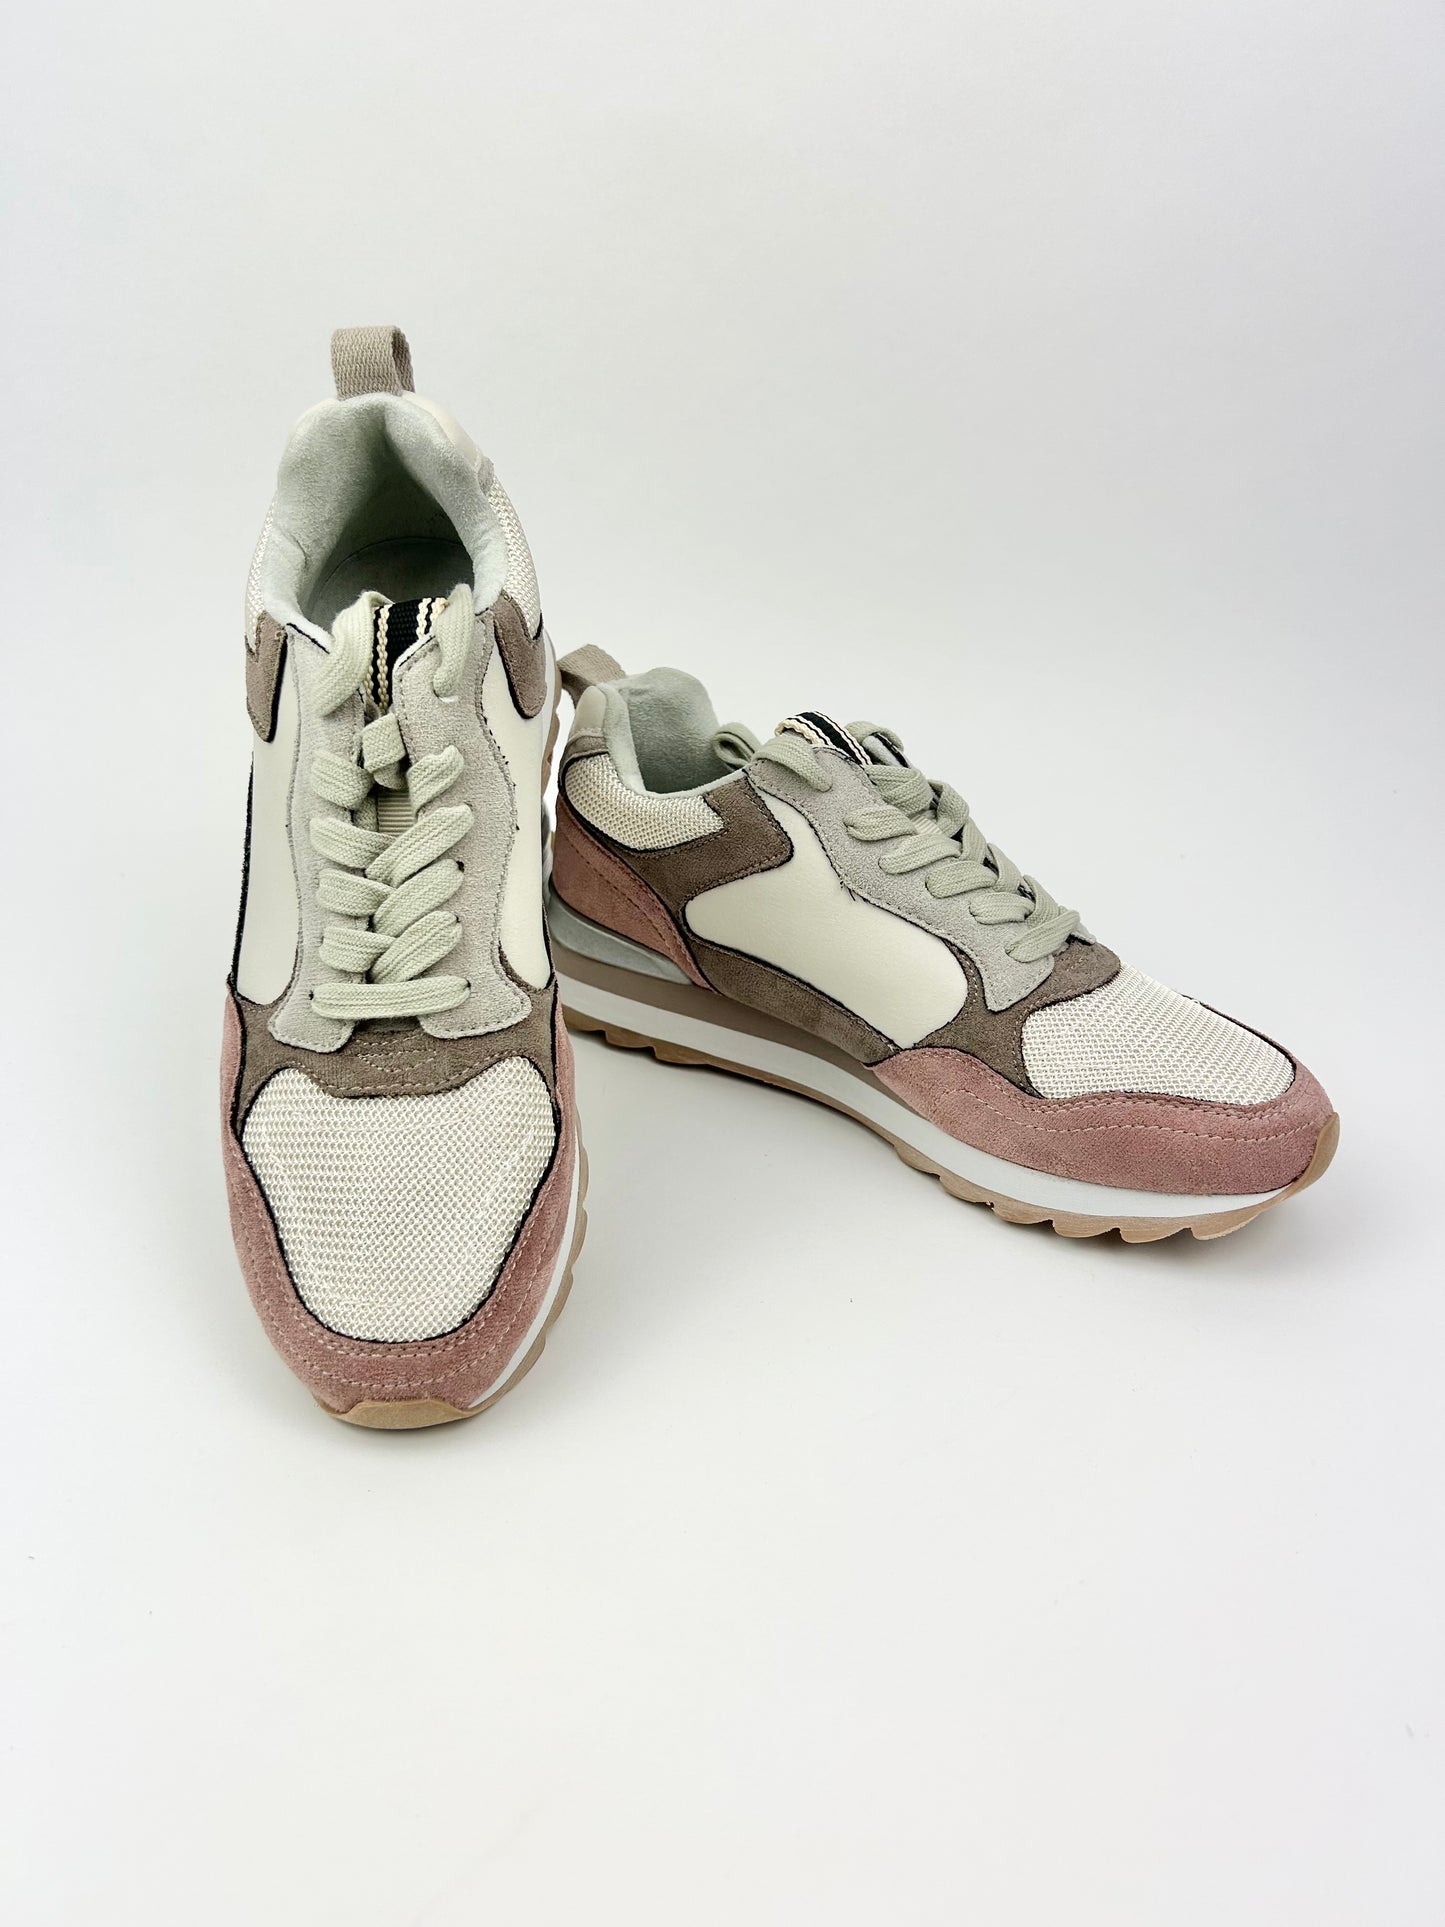 Parker Mauve Sneaker Shoes in  at Wrapsody